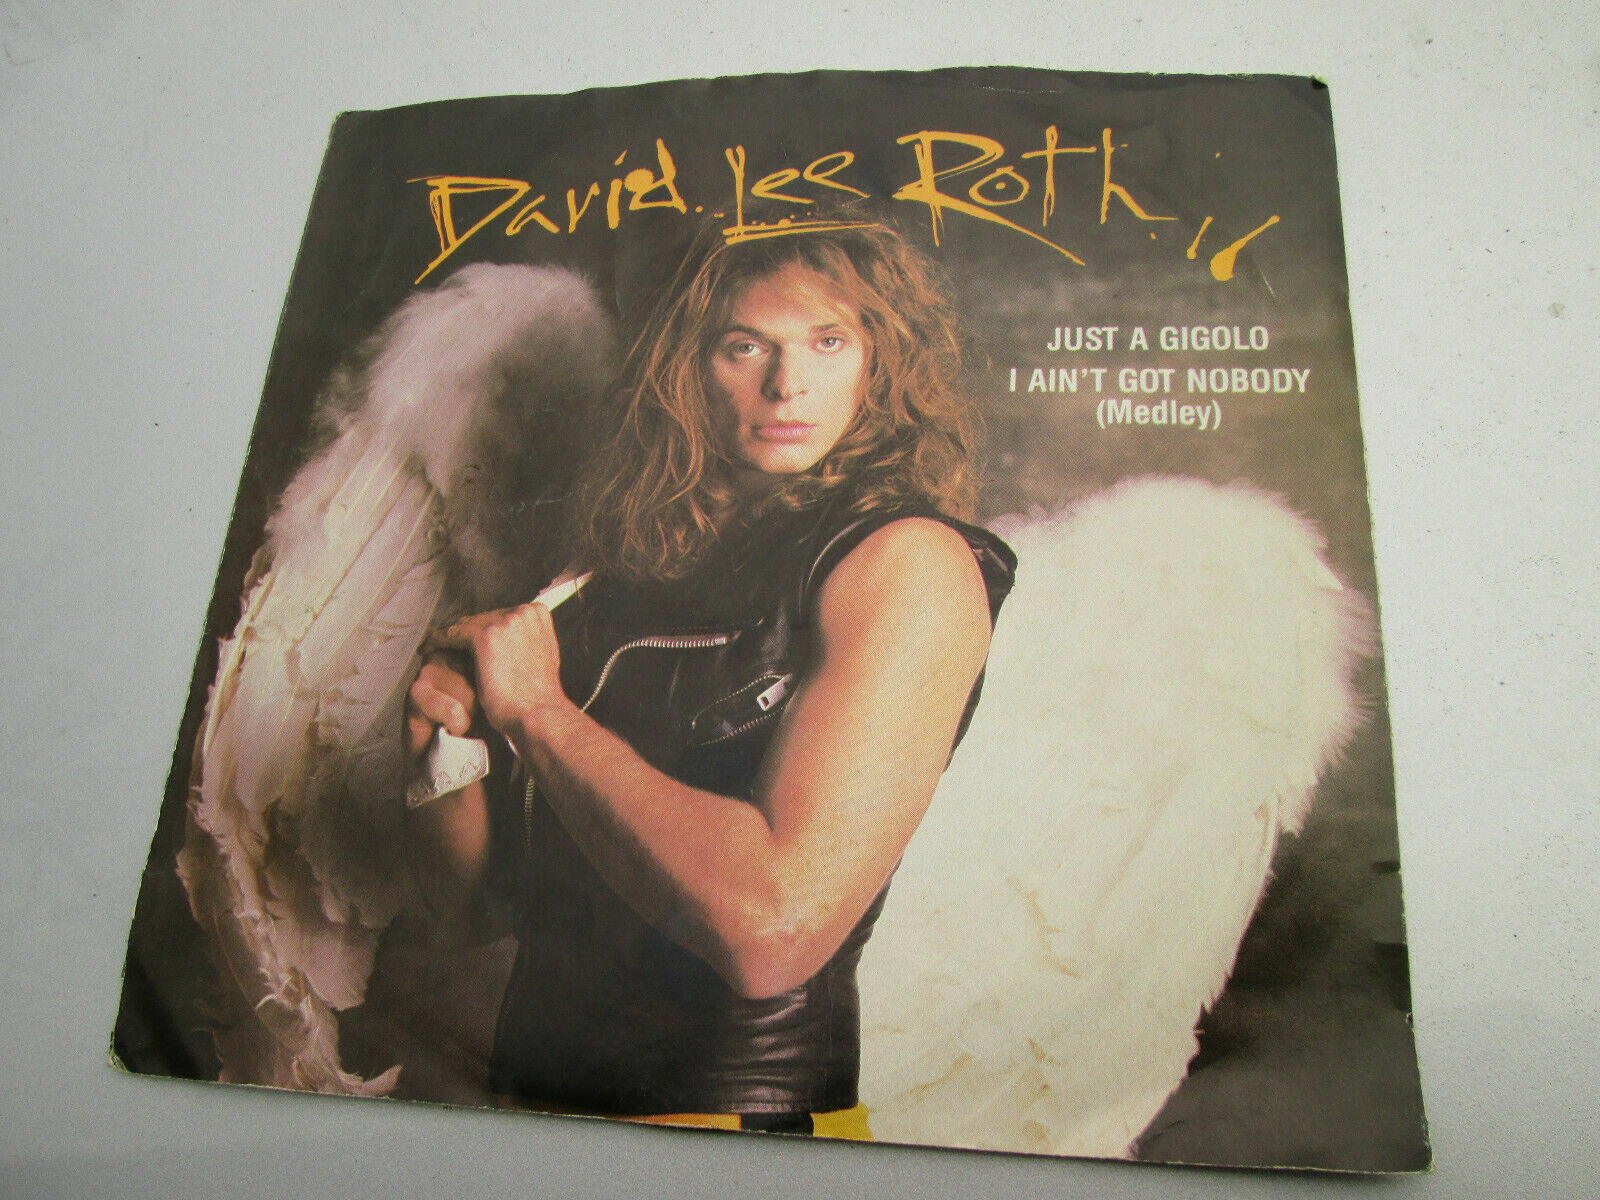  DAVID LEE ROTH  45 rpm Record Vinyl   PICTURE SLEEVE